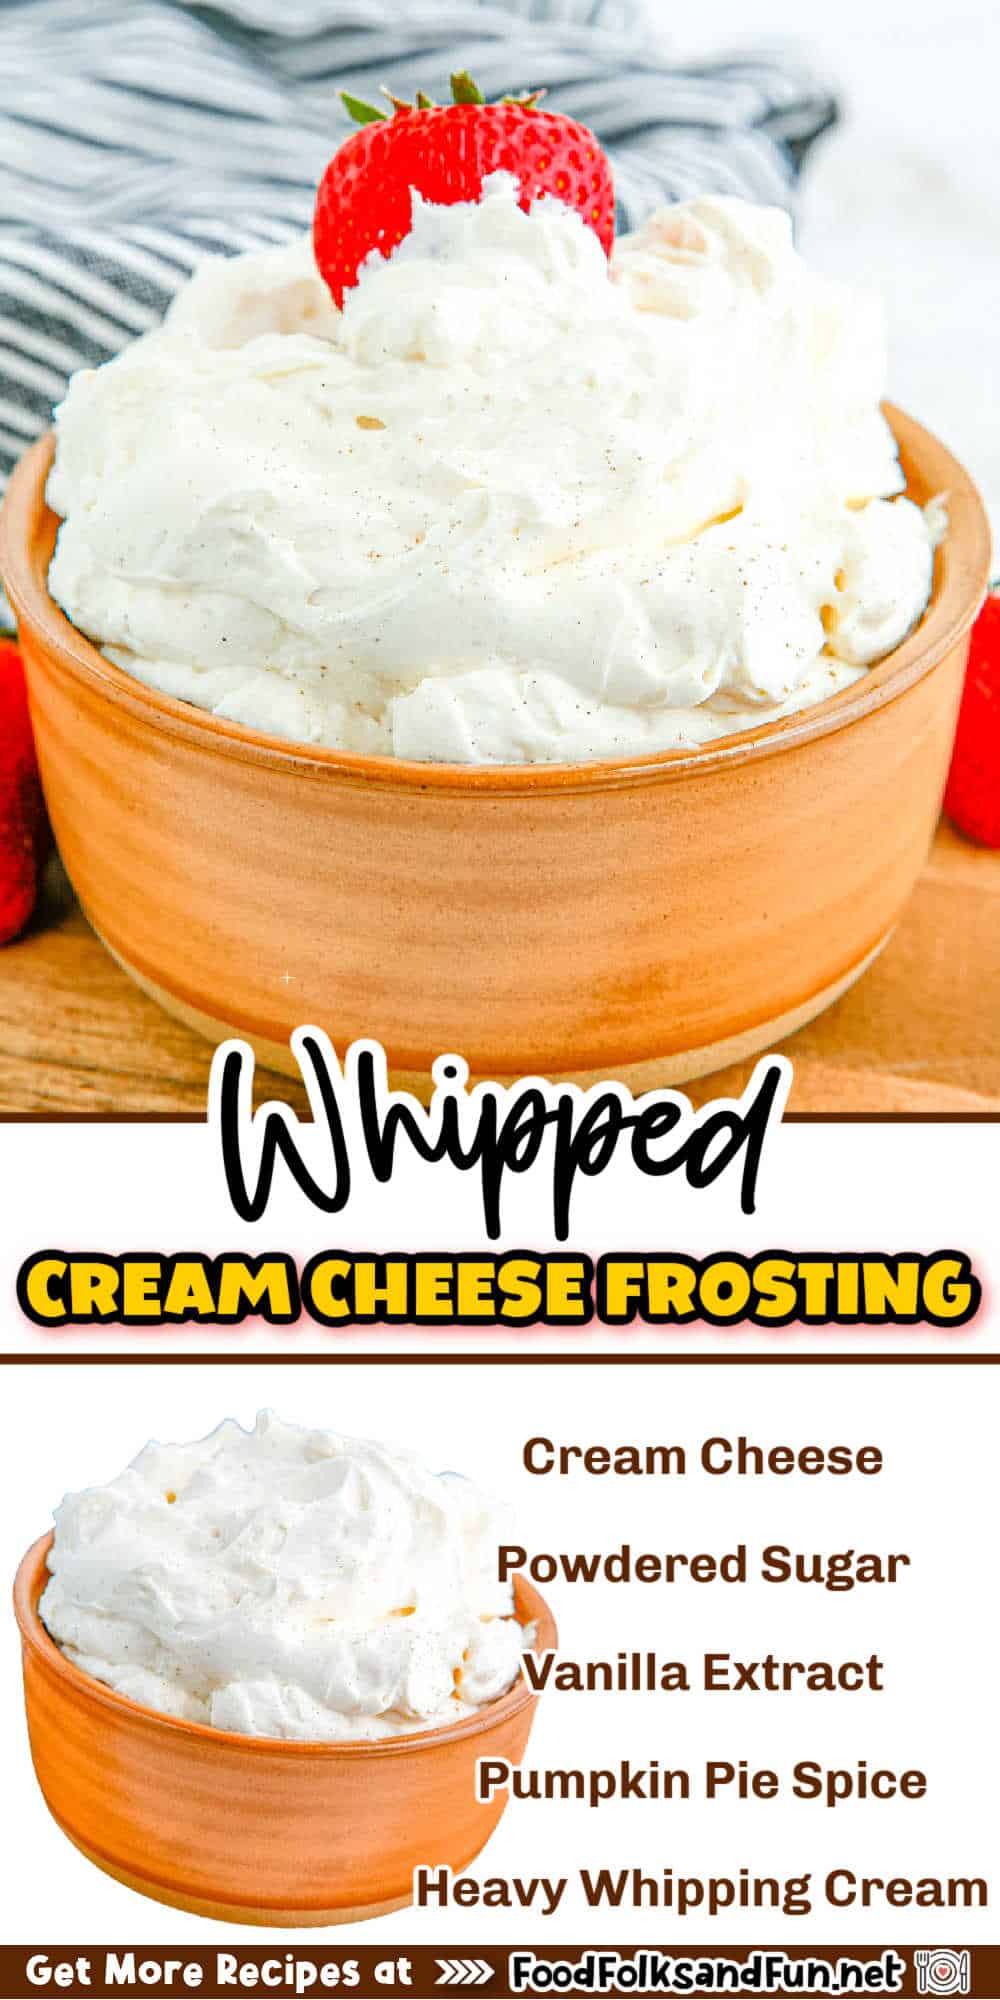 Whipped Cream Cheese Frosting is the perfect topping for cakes, cupcakes, and pies. It's fluffy, creamy, and stabilized because of the cream cheese. via @foodfolksandfun